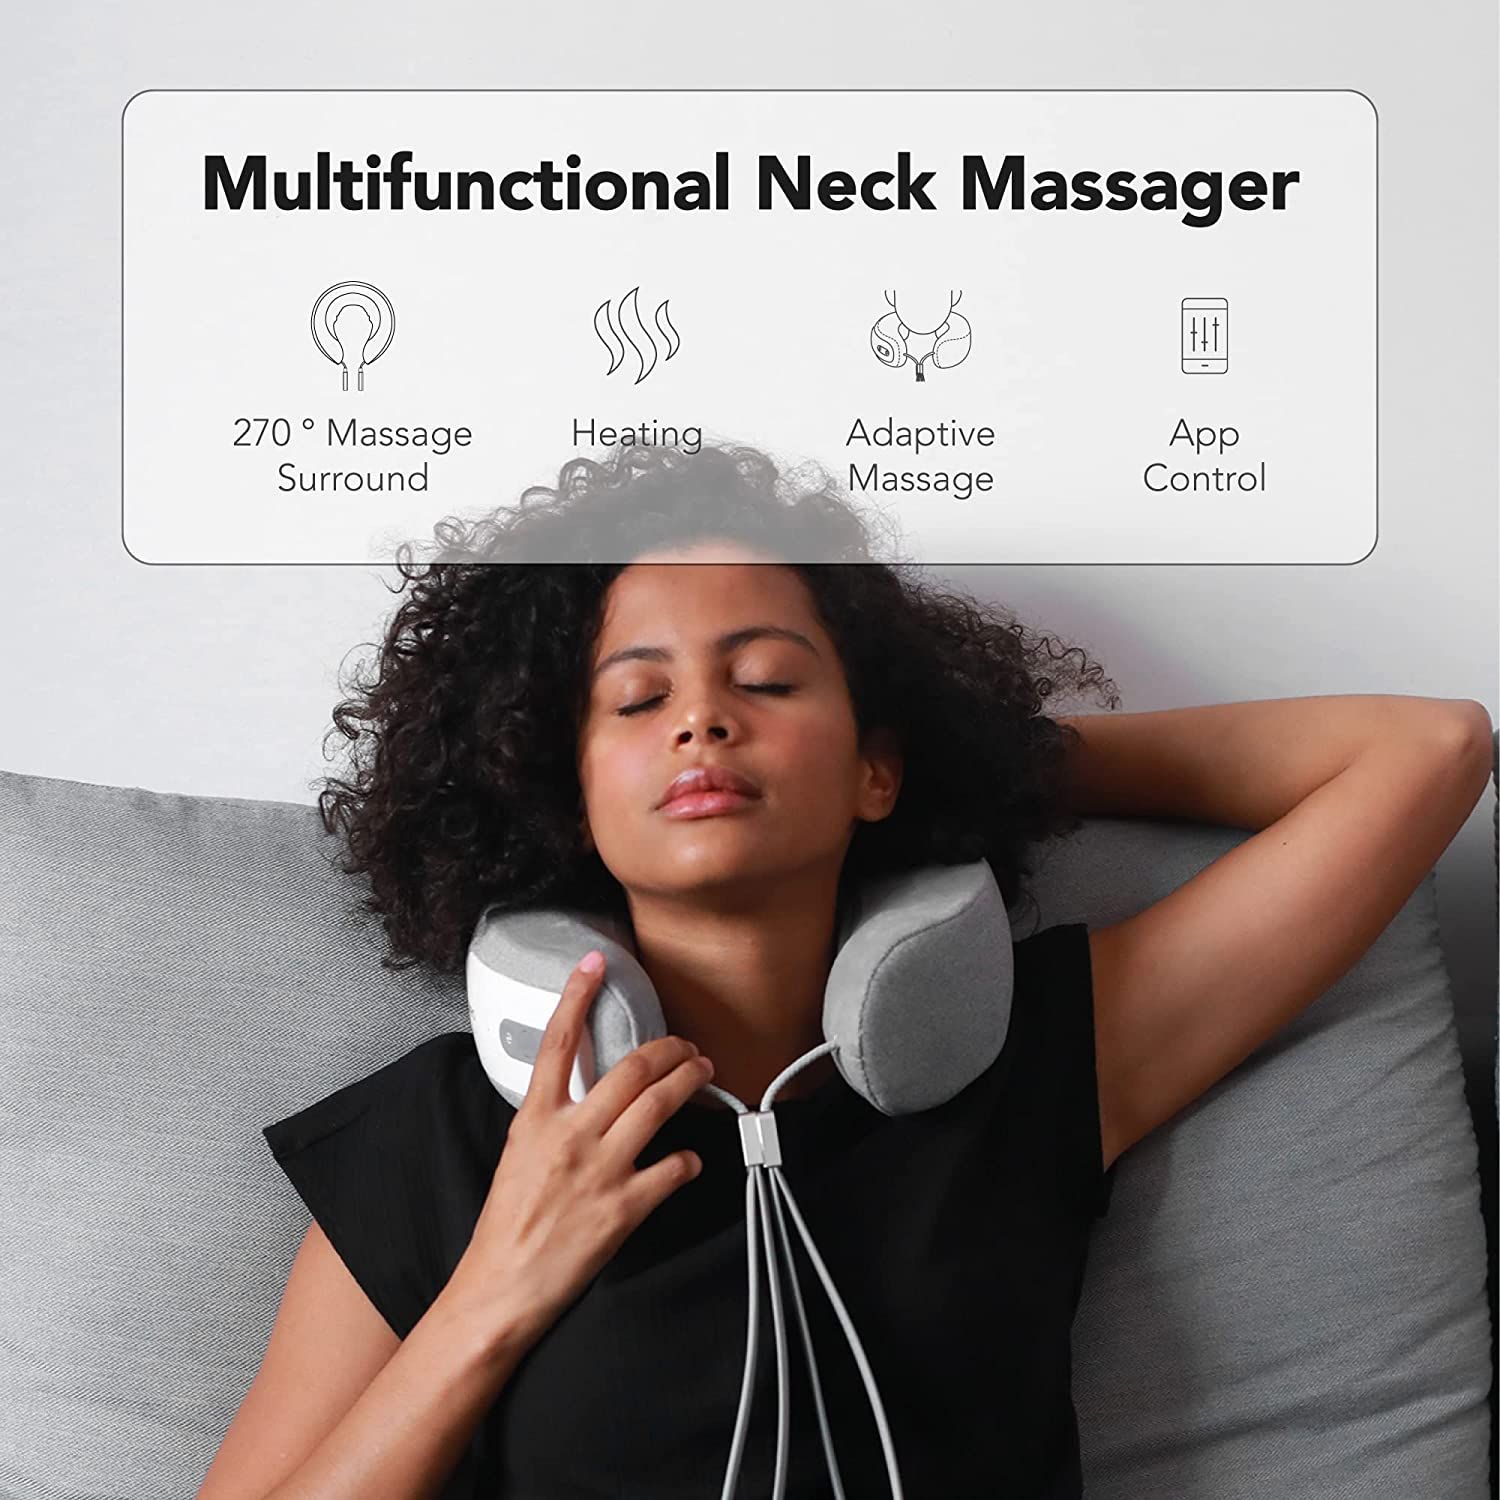  Nekteck Cordless Neck and Back Massager for Pain